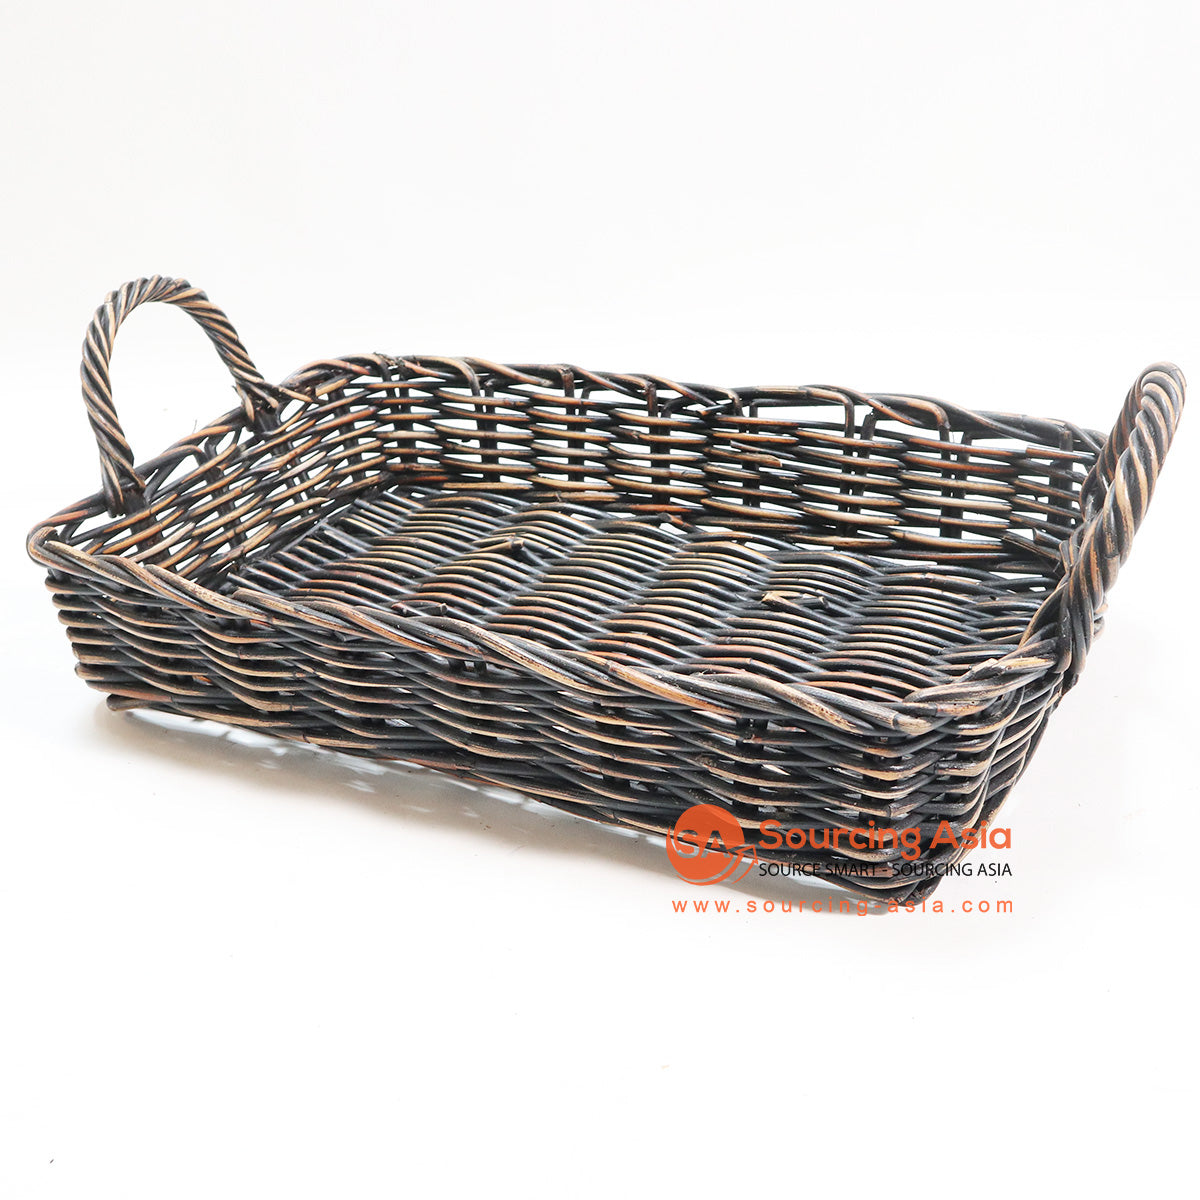 HBSC116-2 BLACK WASHED ANTIQUE RATTAN TRAY WITH HANDLE